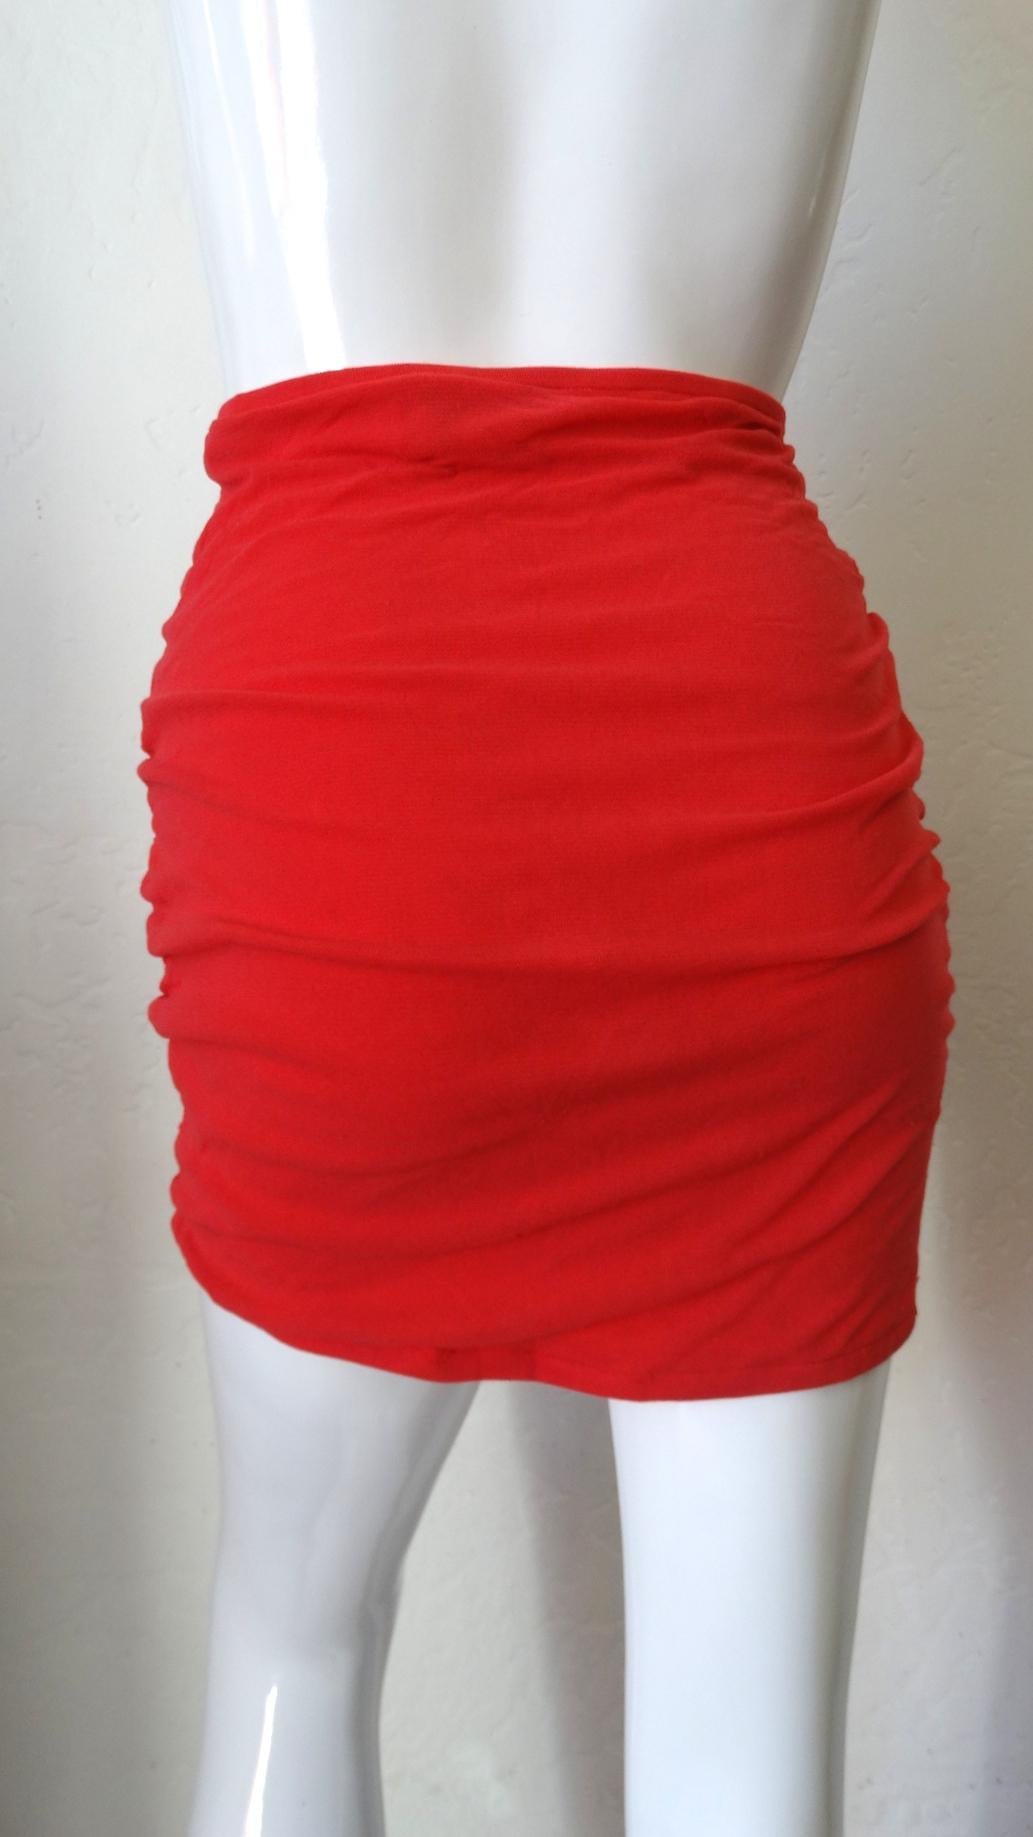 Make Your Beach And Pool Look A Whole Outfit! Circa 1980s, this Giorgio di Sant Angelo skirt coverup is made of vibrant red mesh and has a lined interior. Features ruching on the sides to create natural soft pleating in the front and back. Matching